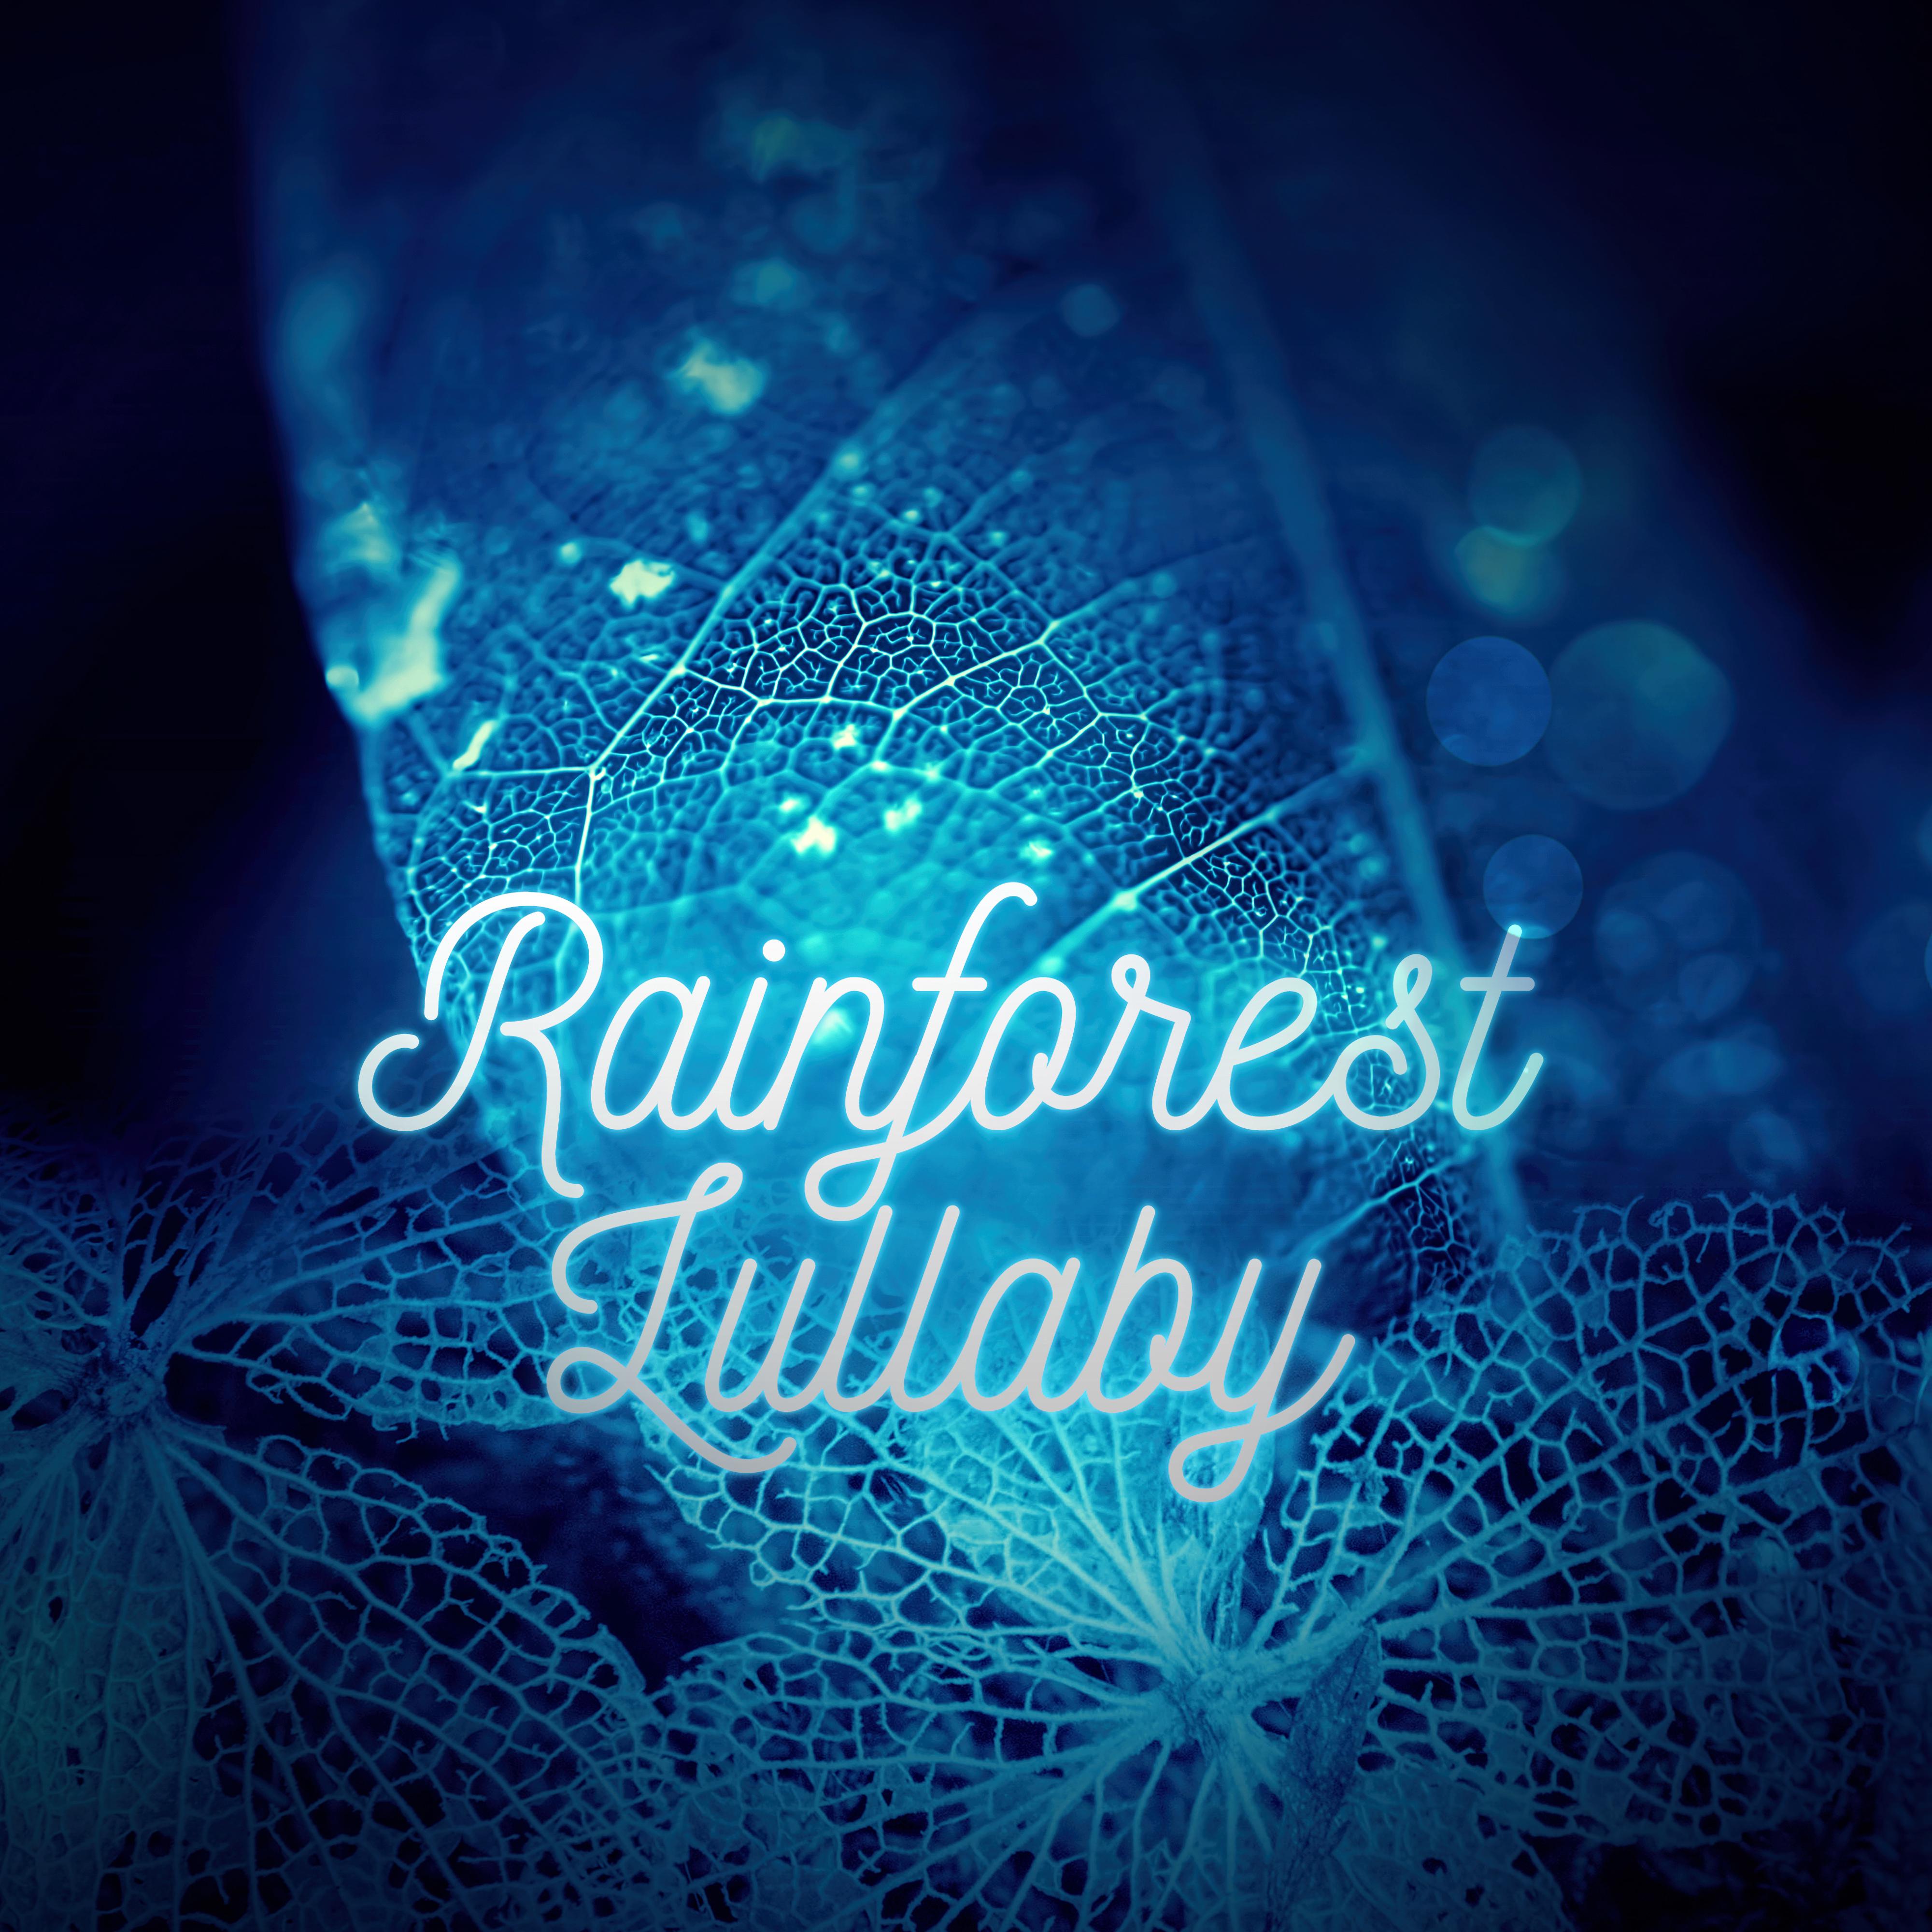 Rainforest Lullaby  Soothing Sleep Music with Rain Sounds to Relax and Fall Asleep, Destress and Inner Peace, Natural Sleep Aids